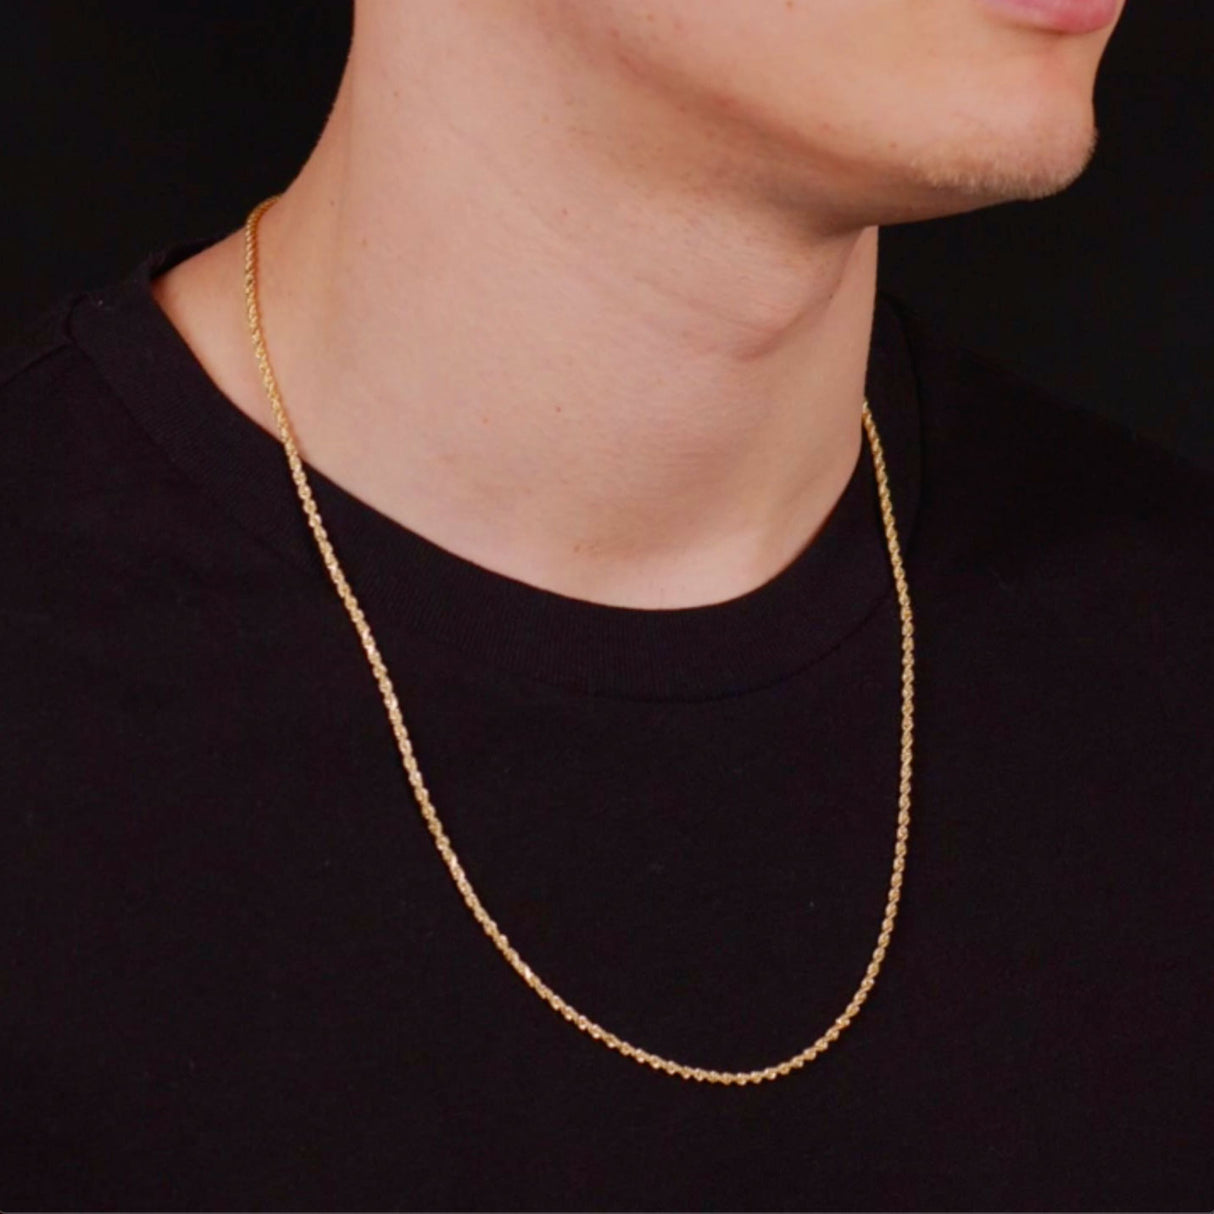 8mm Rope 14K Gold Vermeil Over Solid 925 Sterling Silver Chain Necklace  Diamond Cut Men Women